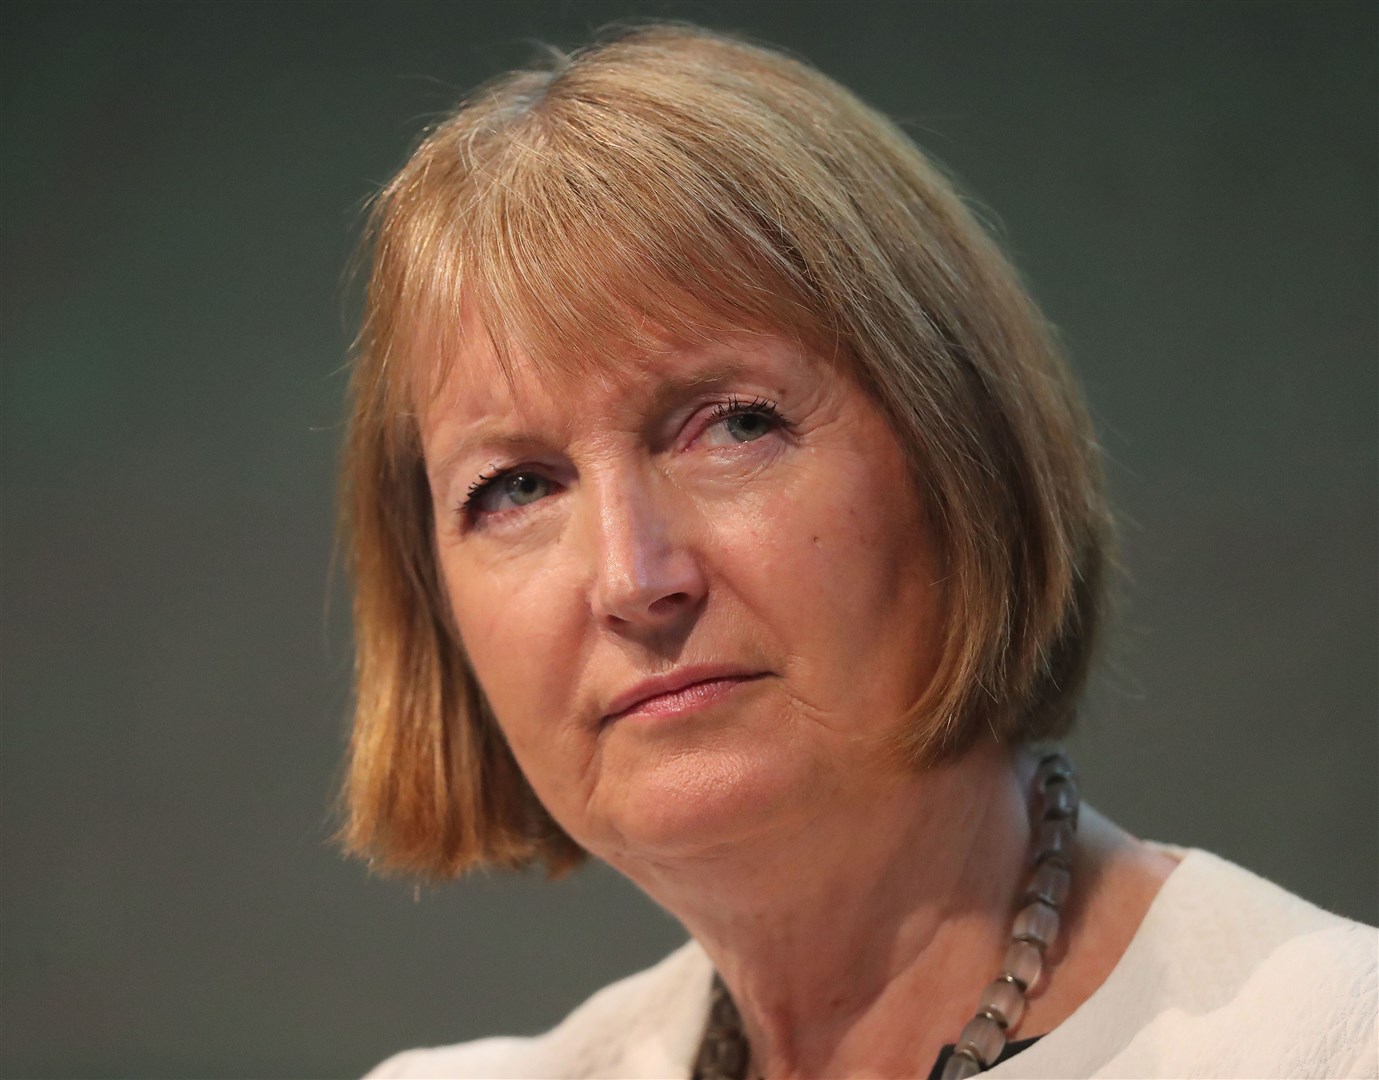 Harriet Harman has suggested a return of Covid-style remote working could be needed in Parliament over security fears (Niall Carson/PA)